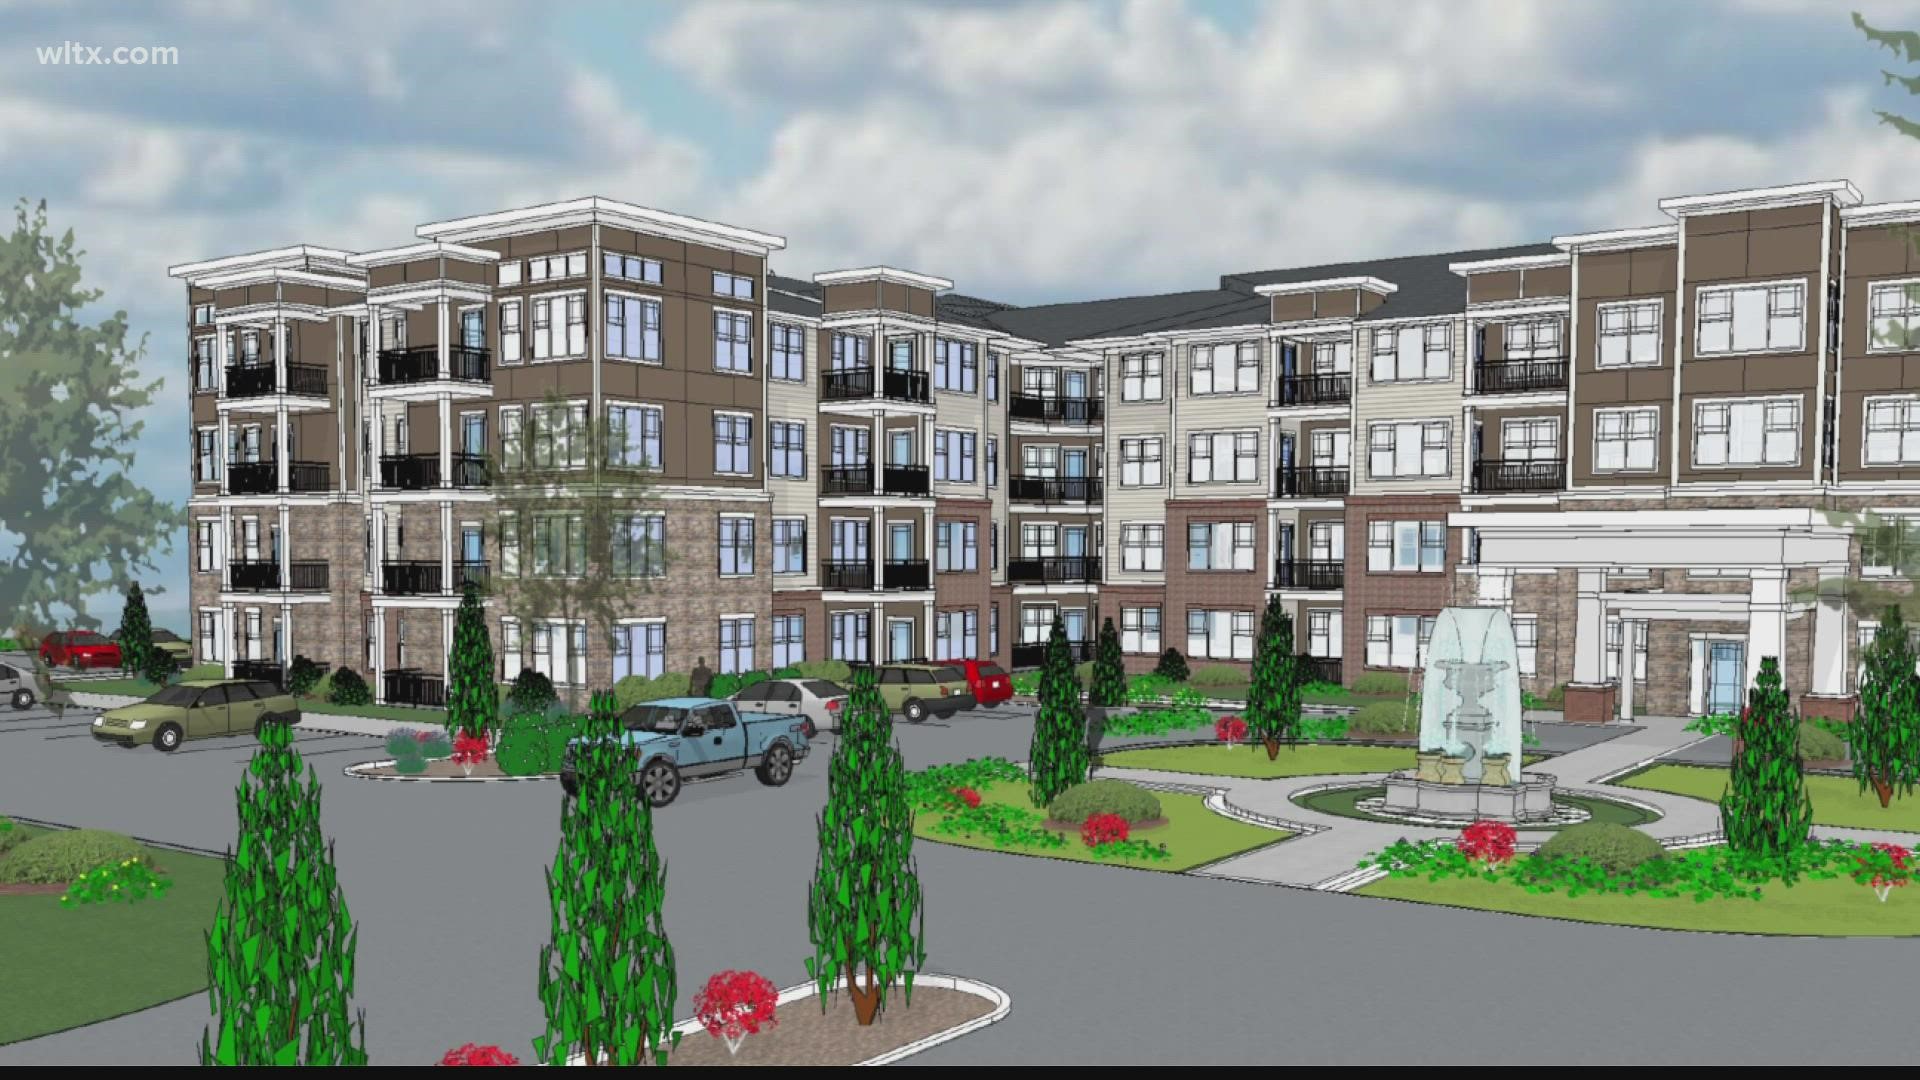 Construction is set to begin this month and should have 200 units for seniors.